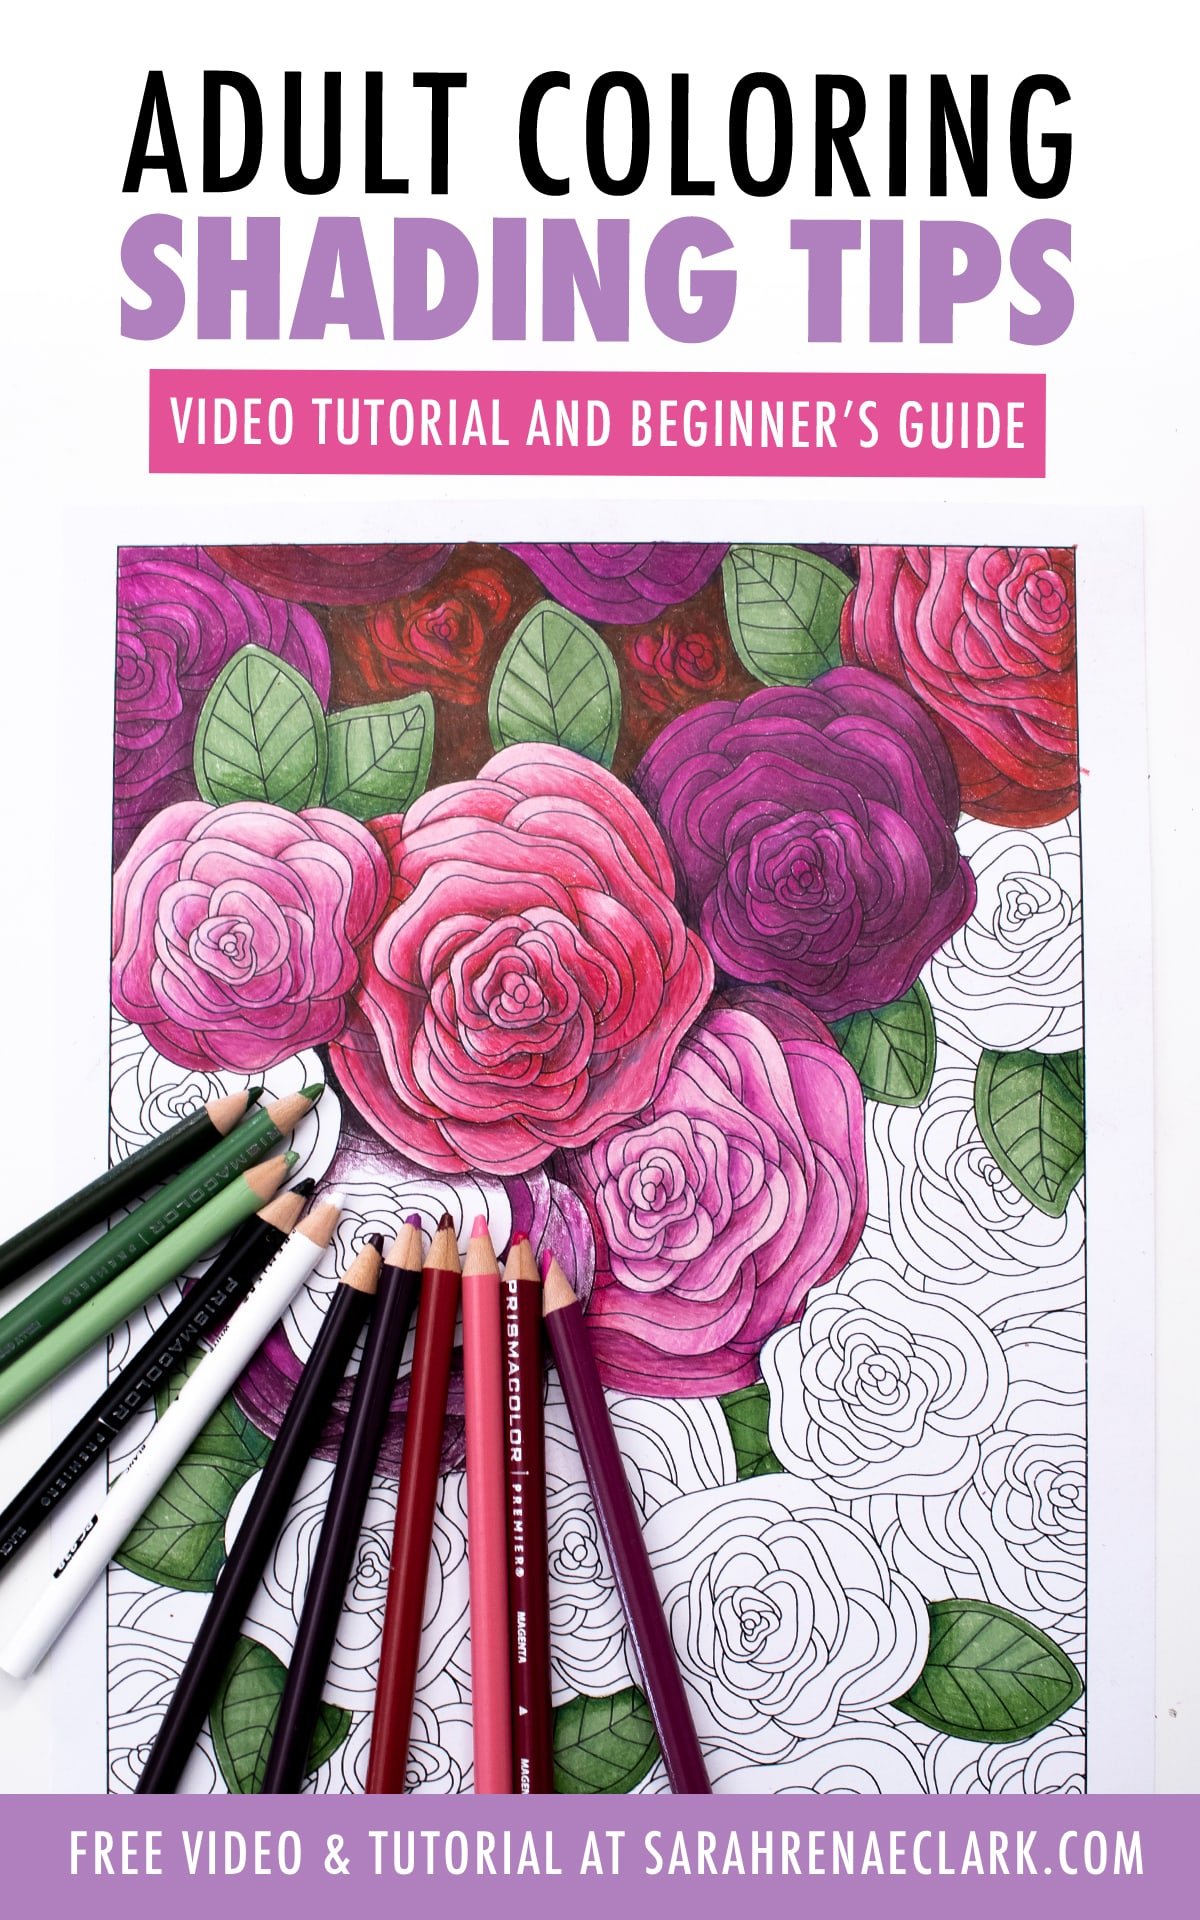 I. Introduction to Shading Techniques in Coloring Books